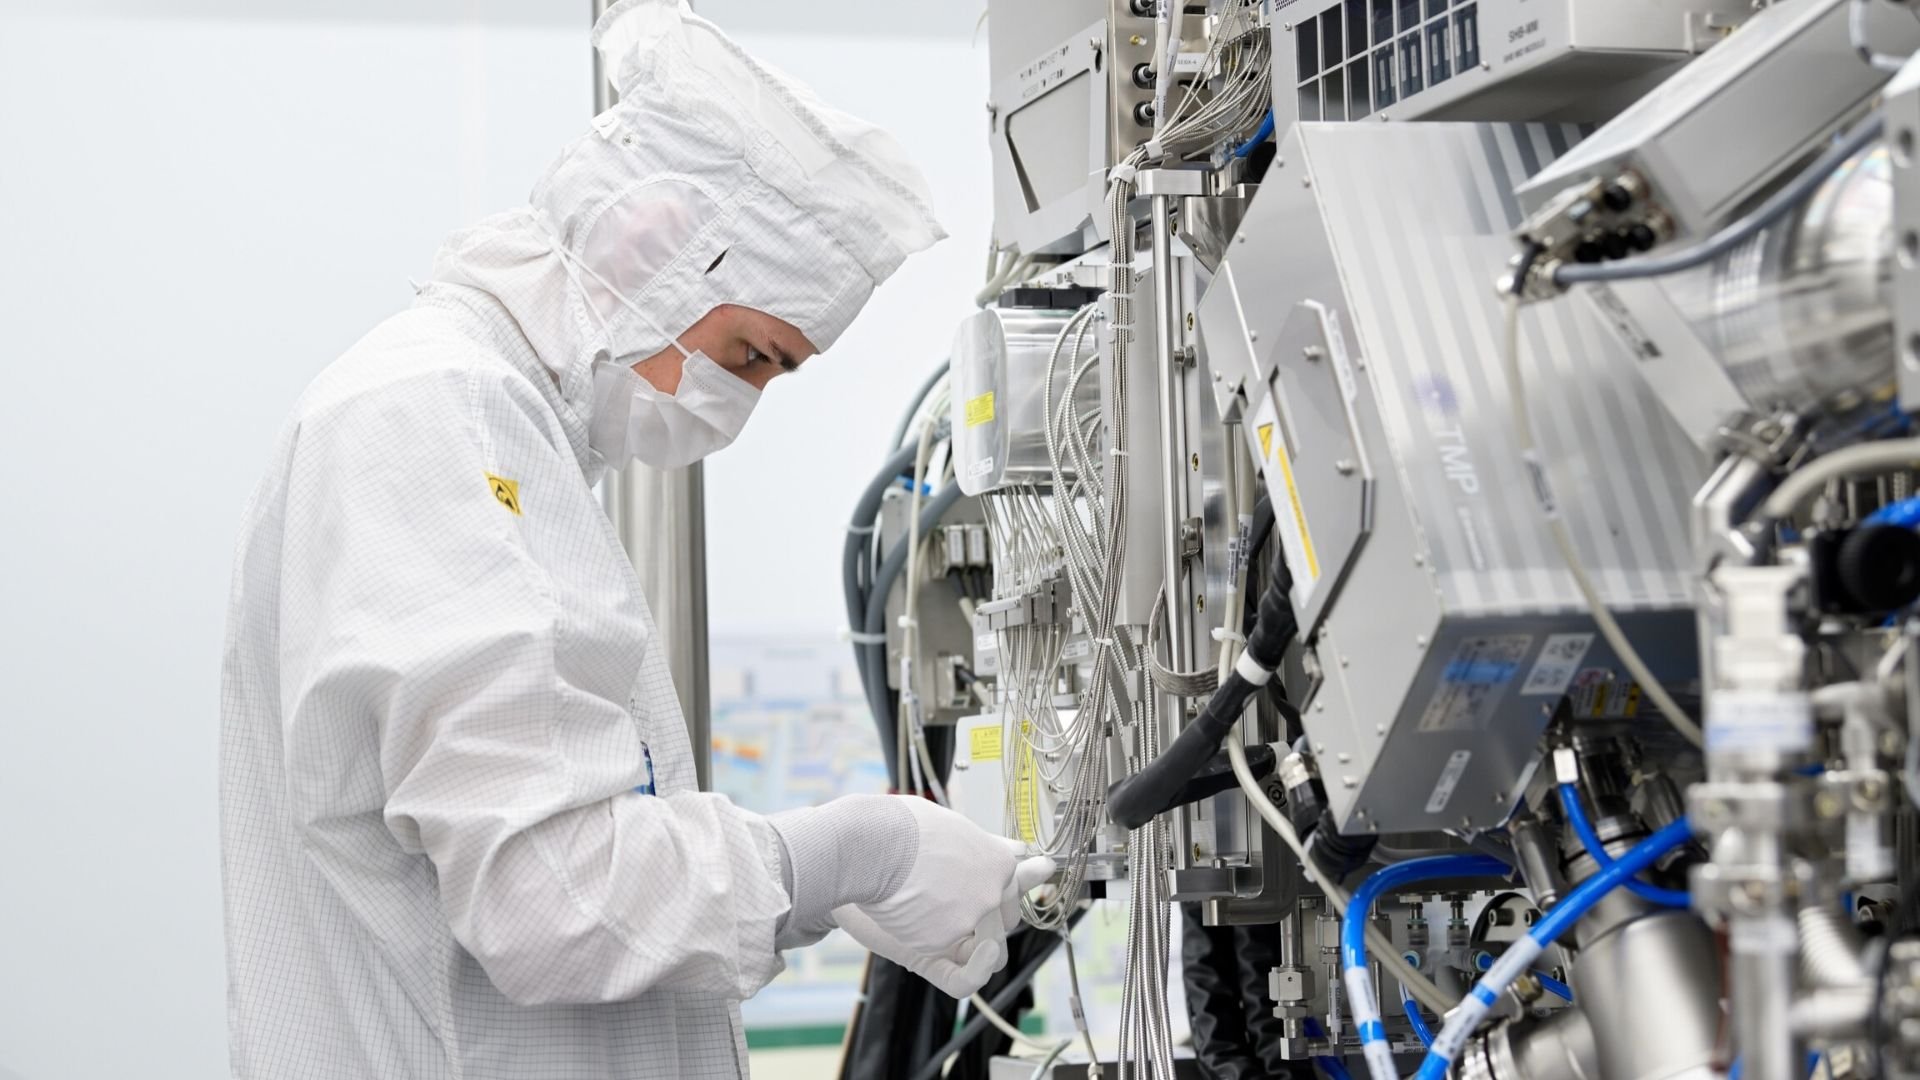 A man in a white cleanroom suit adjusts an ASML lithography machine.